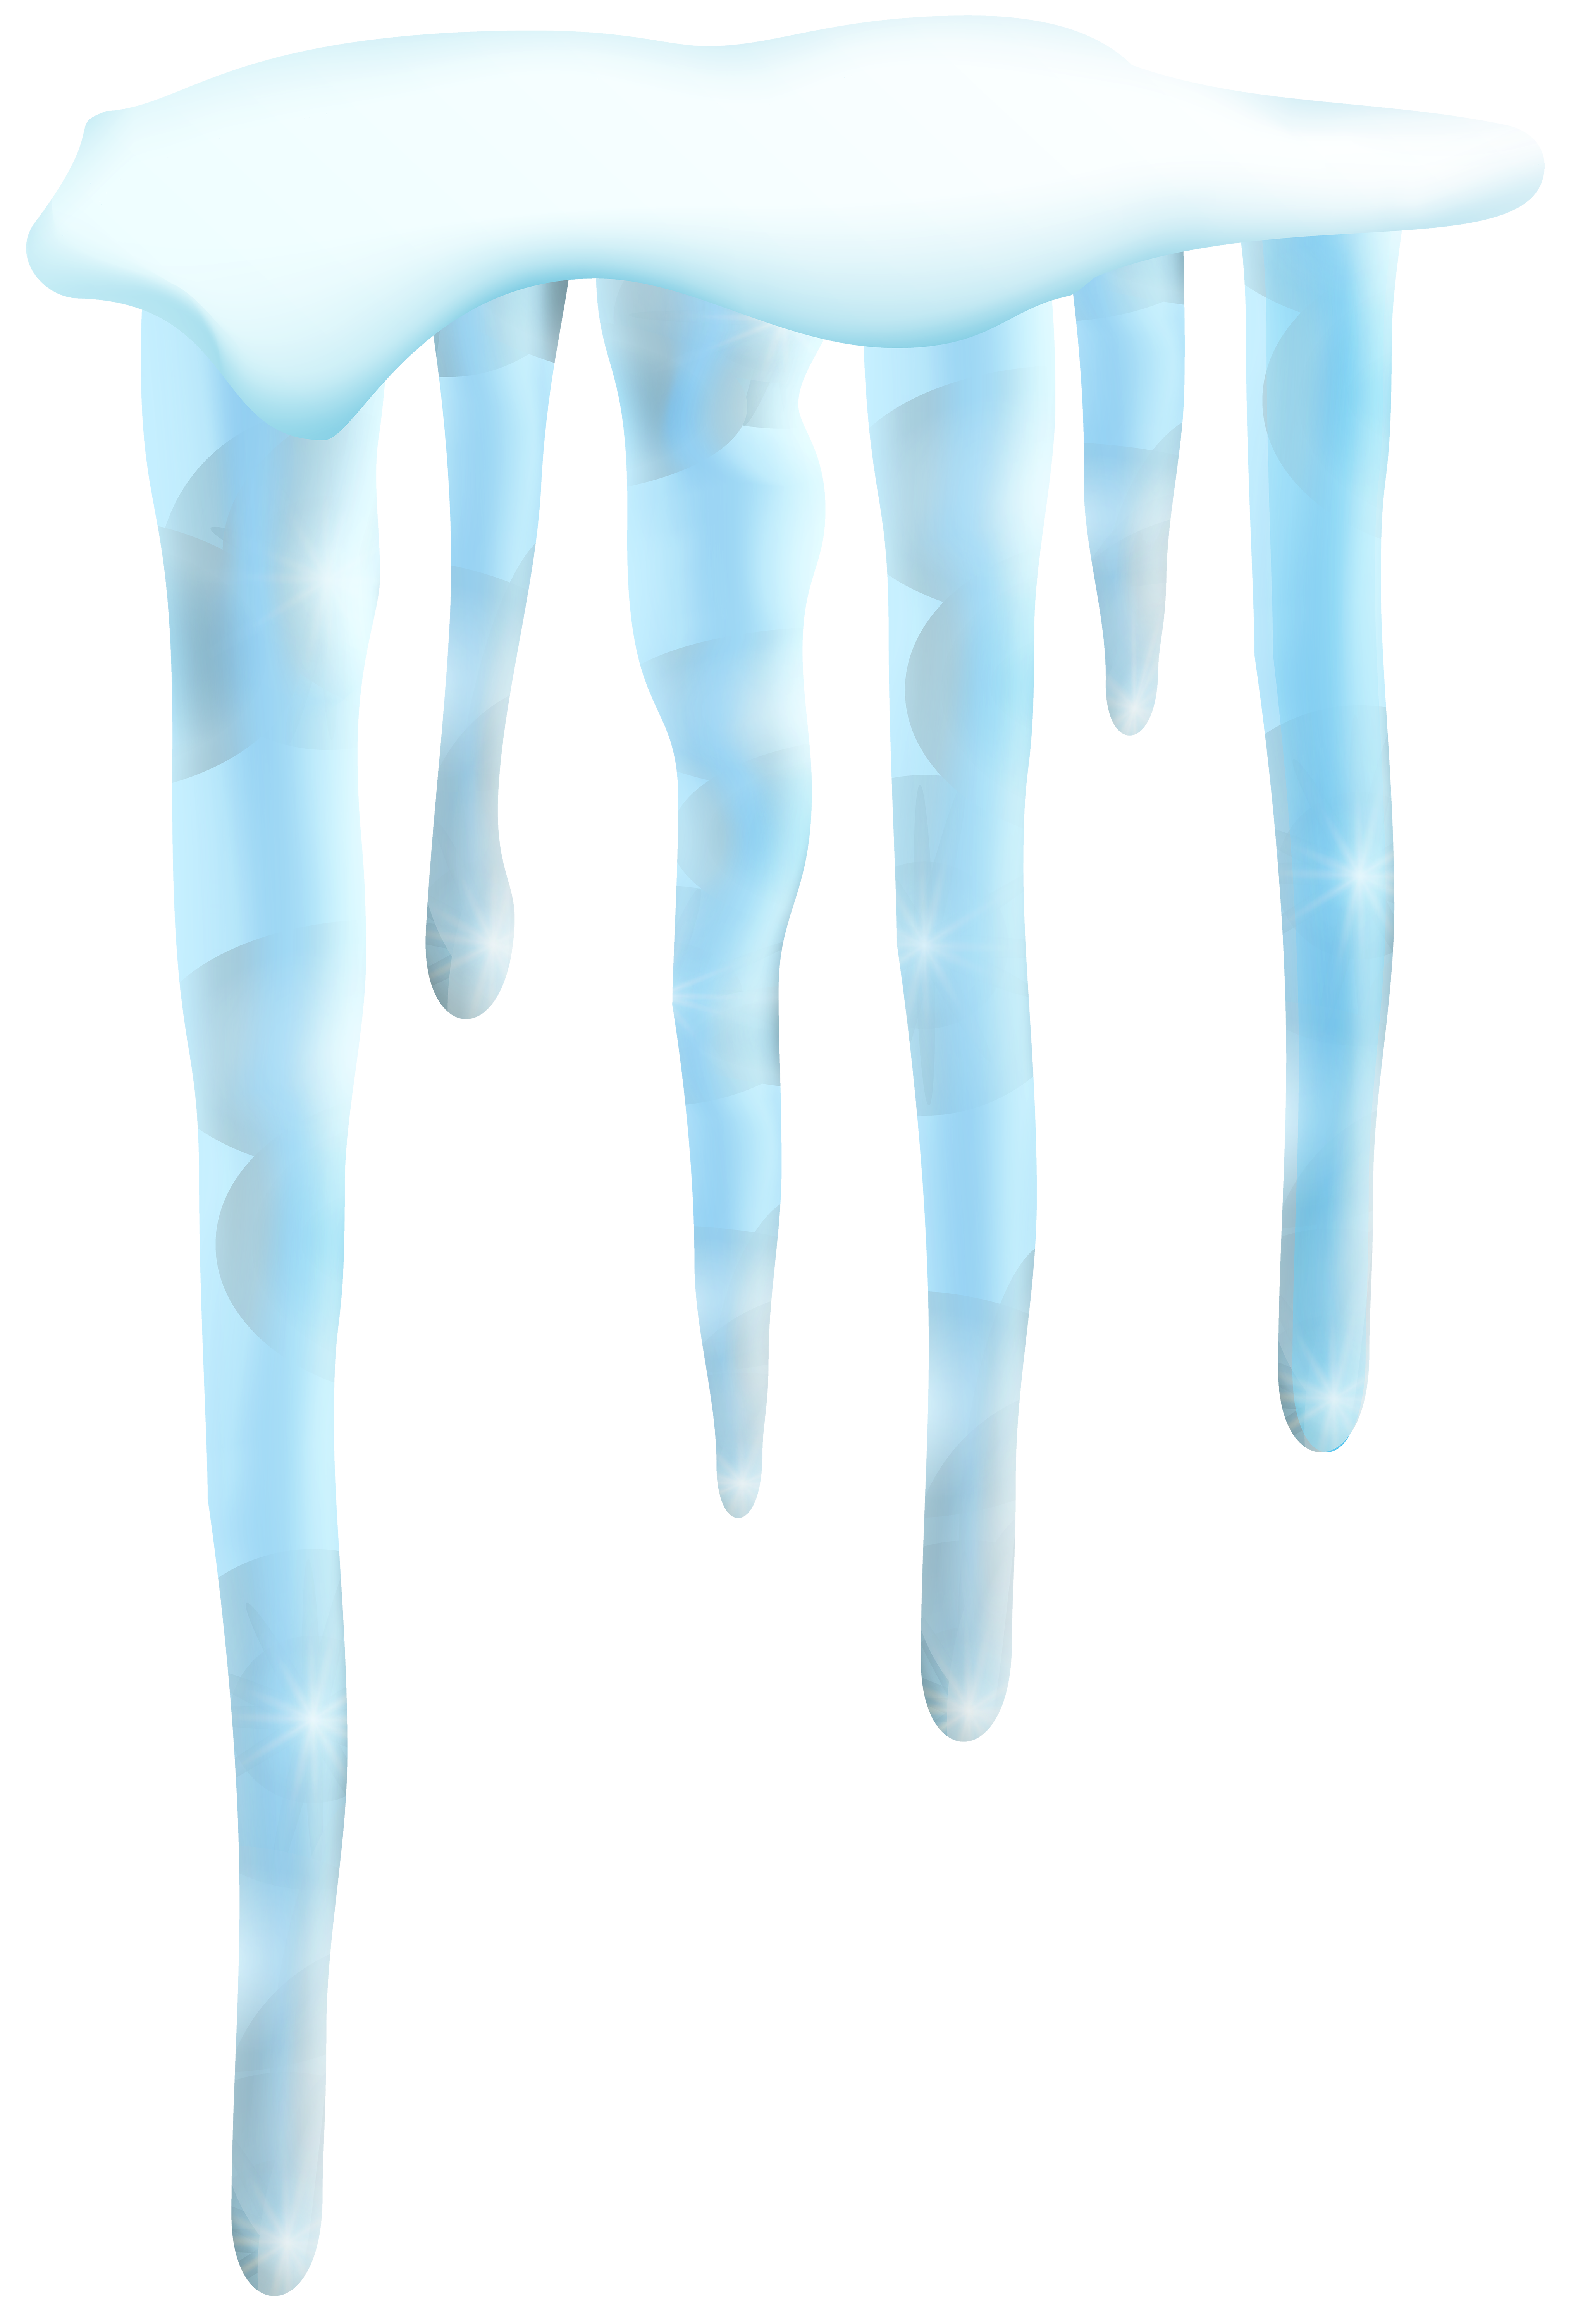 Chart Icicles Slips Canopy Needle PNG